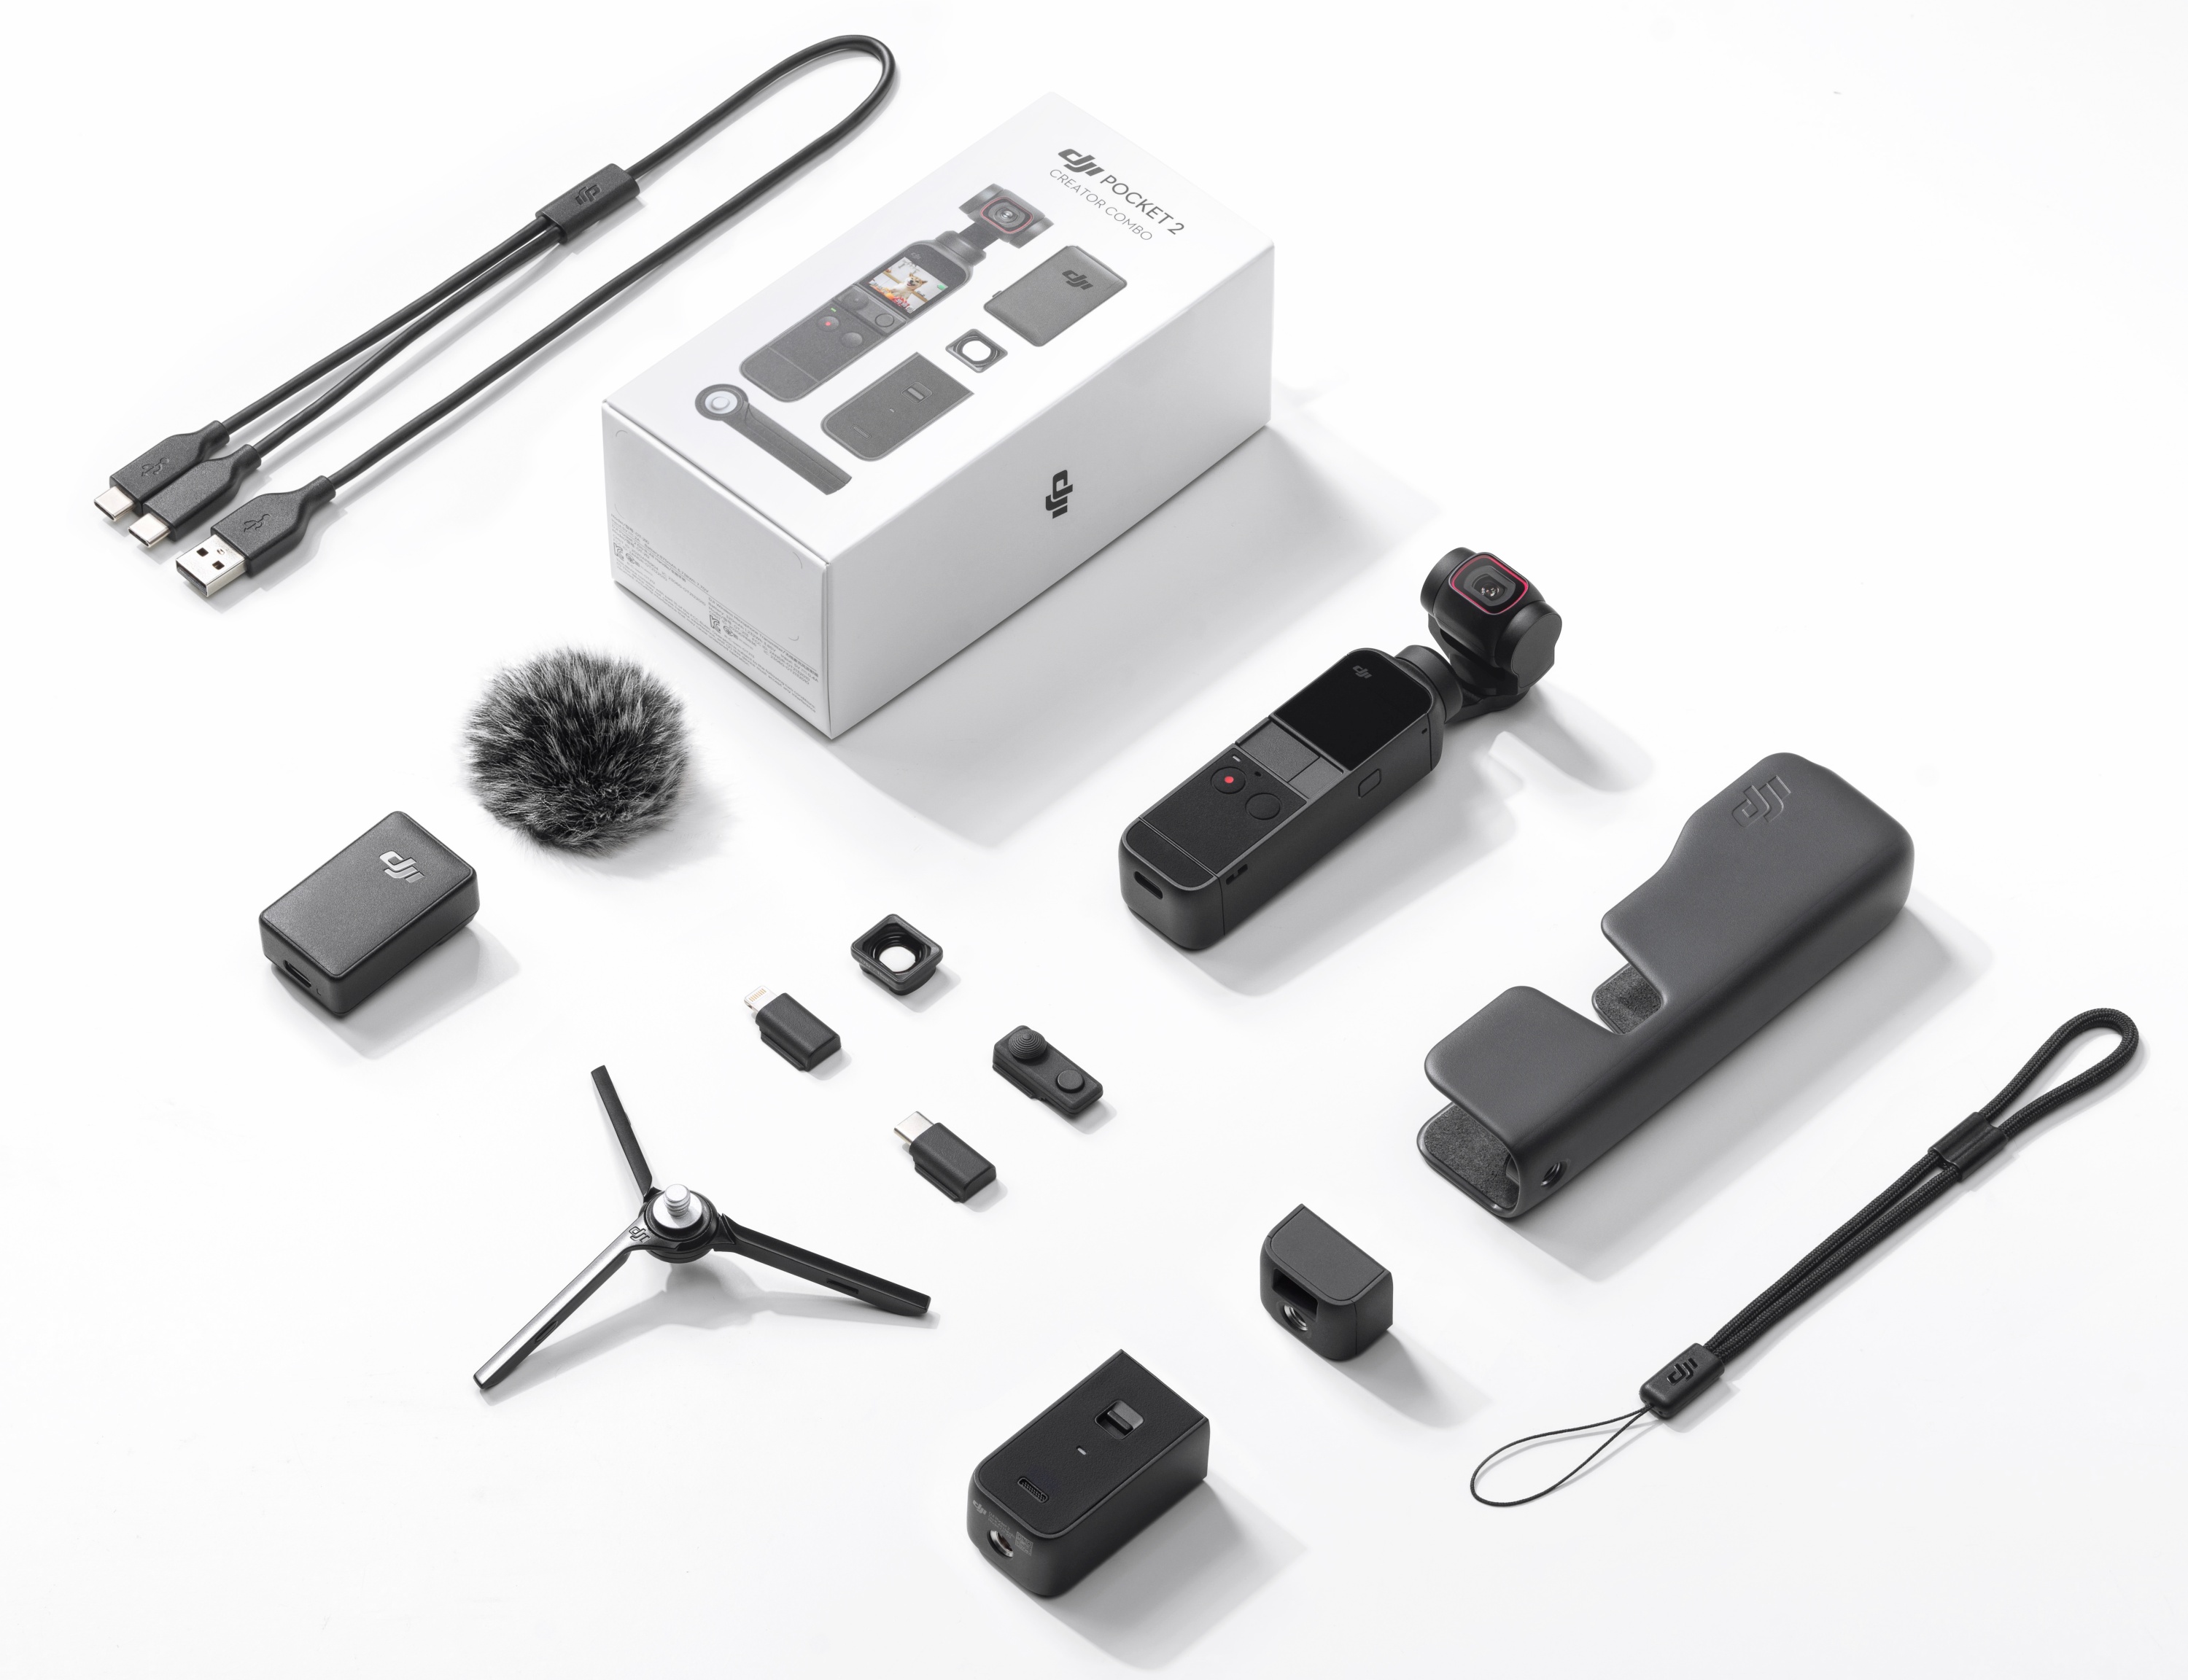 DJI Pocket 2 packs more features and more mics into tiny 4K 